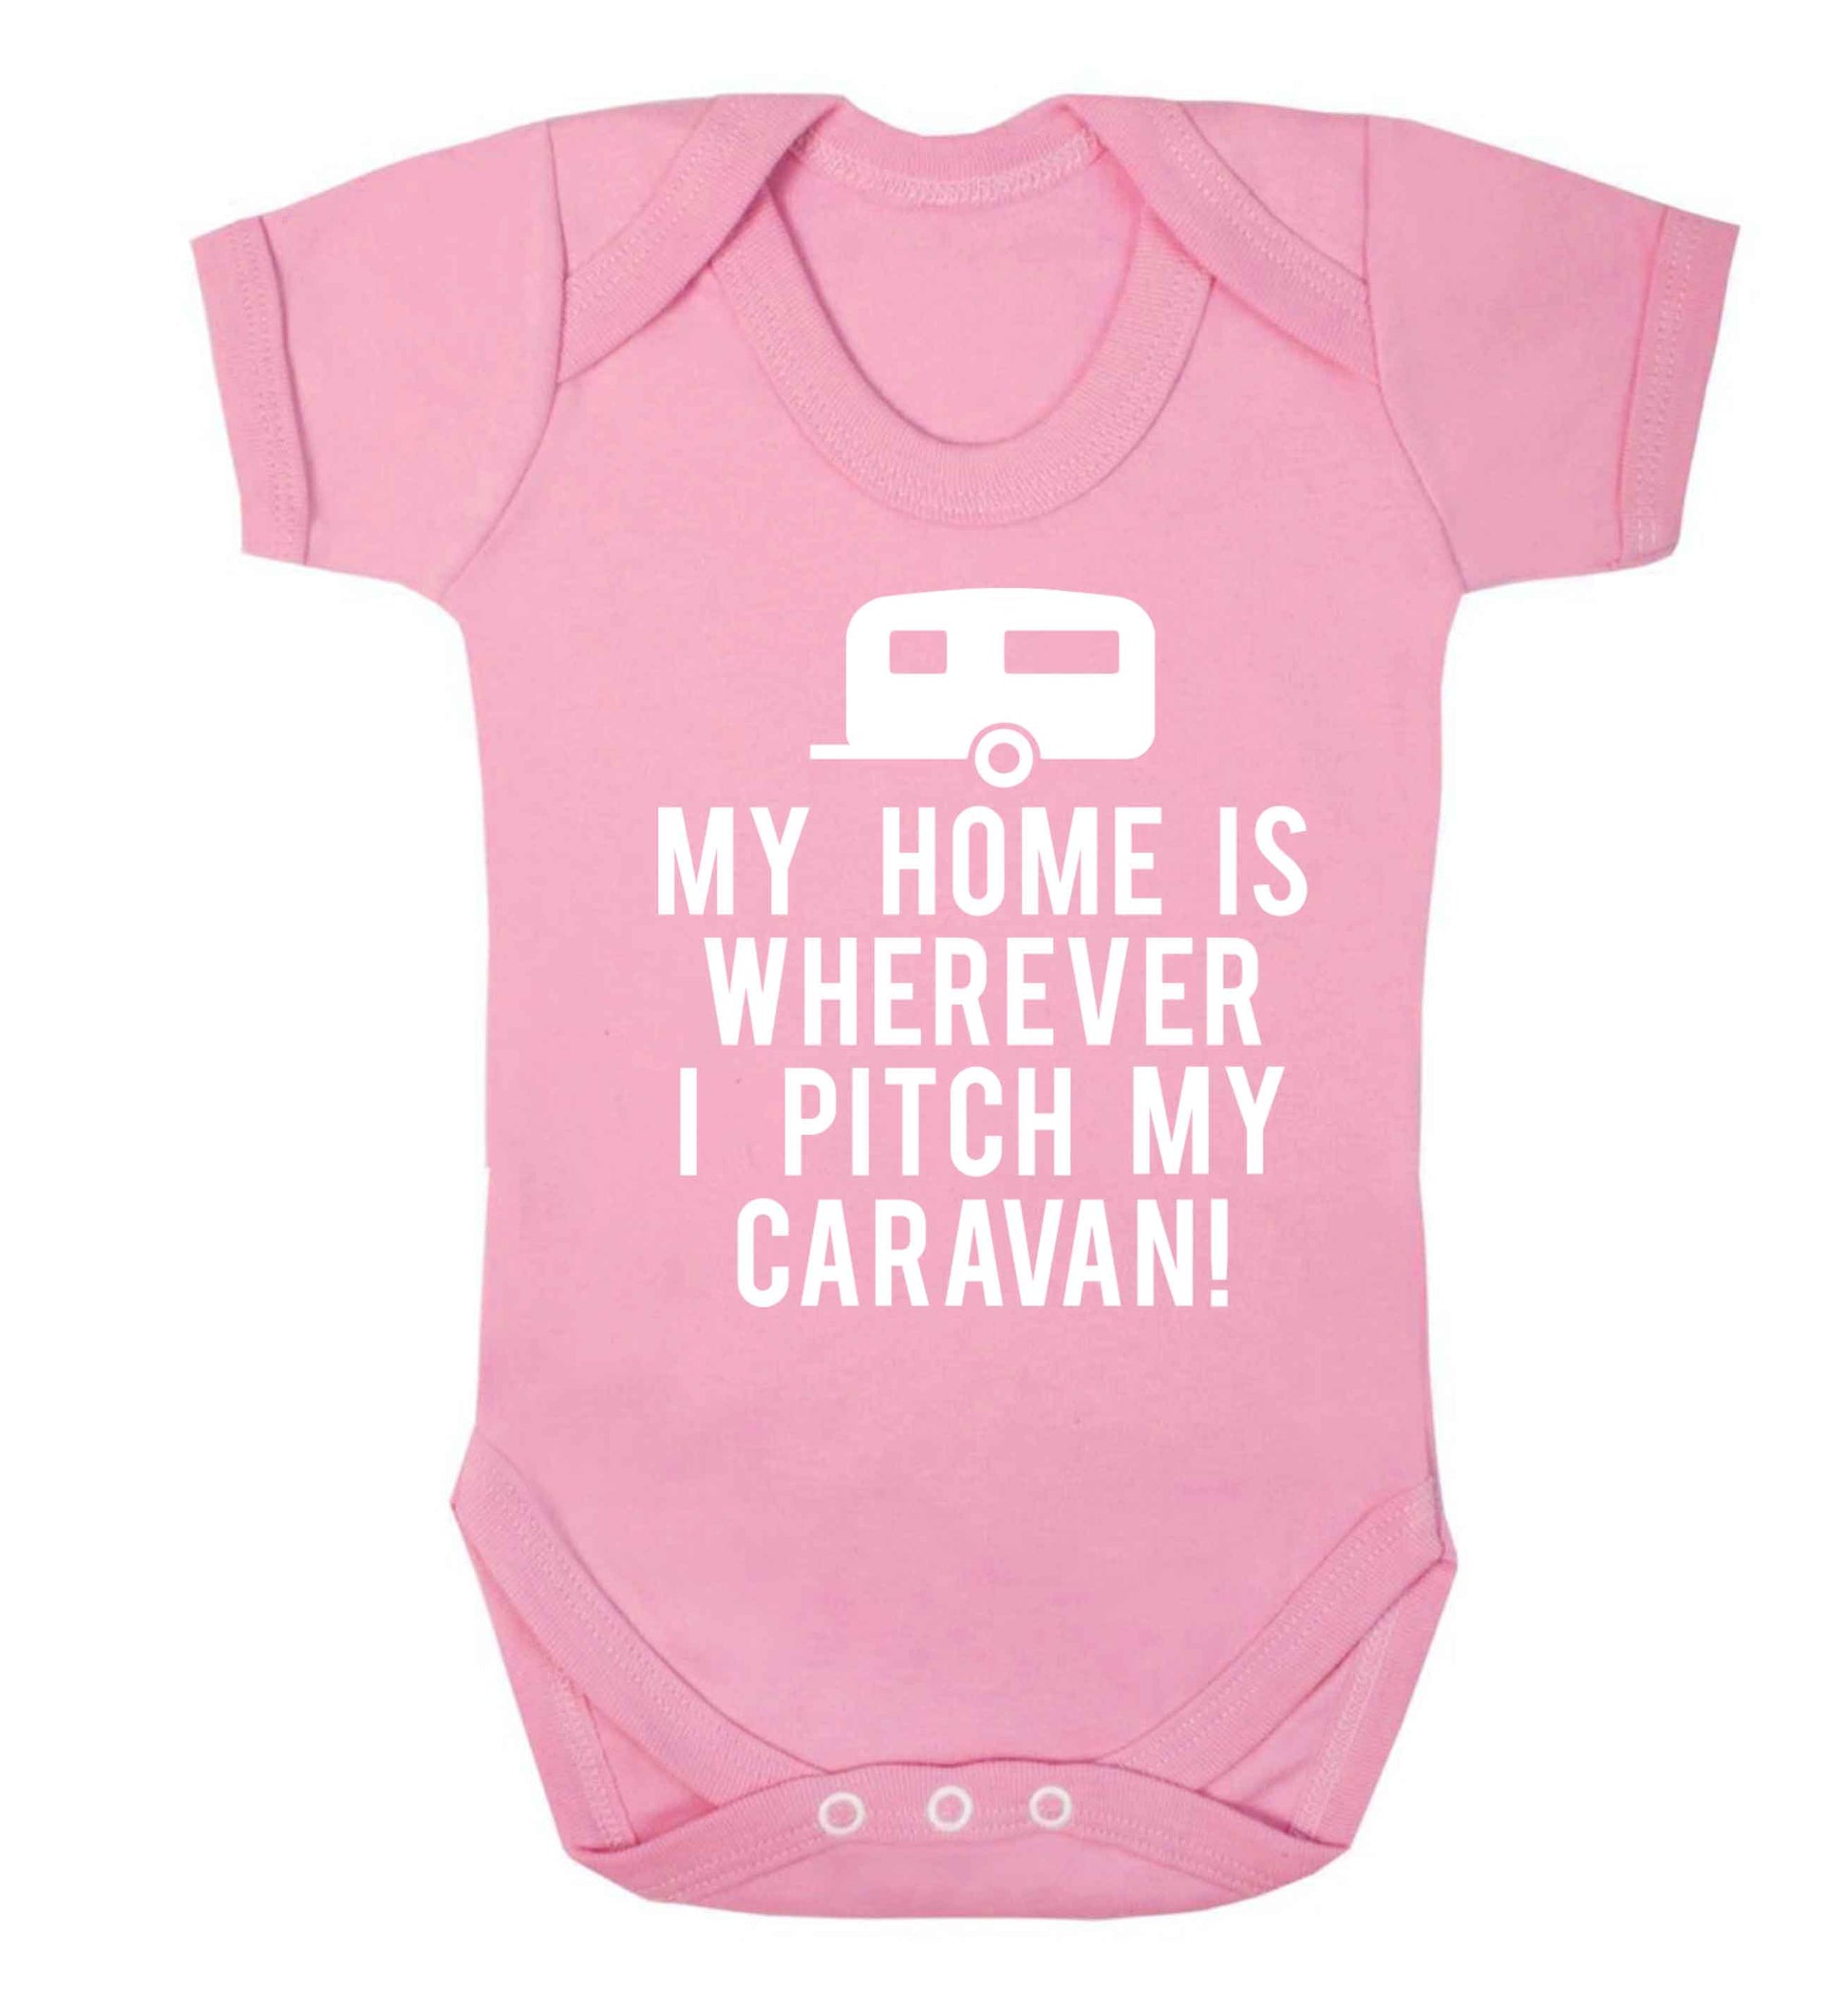 My home is wherever I pitch my caravan Baby Vest pale pink 18-24 months